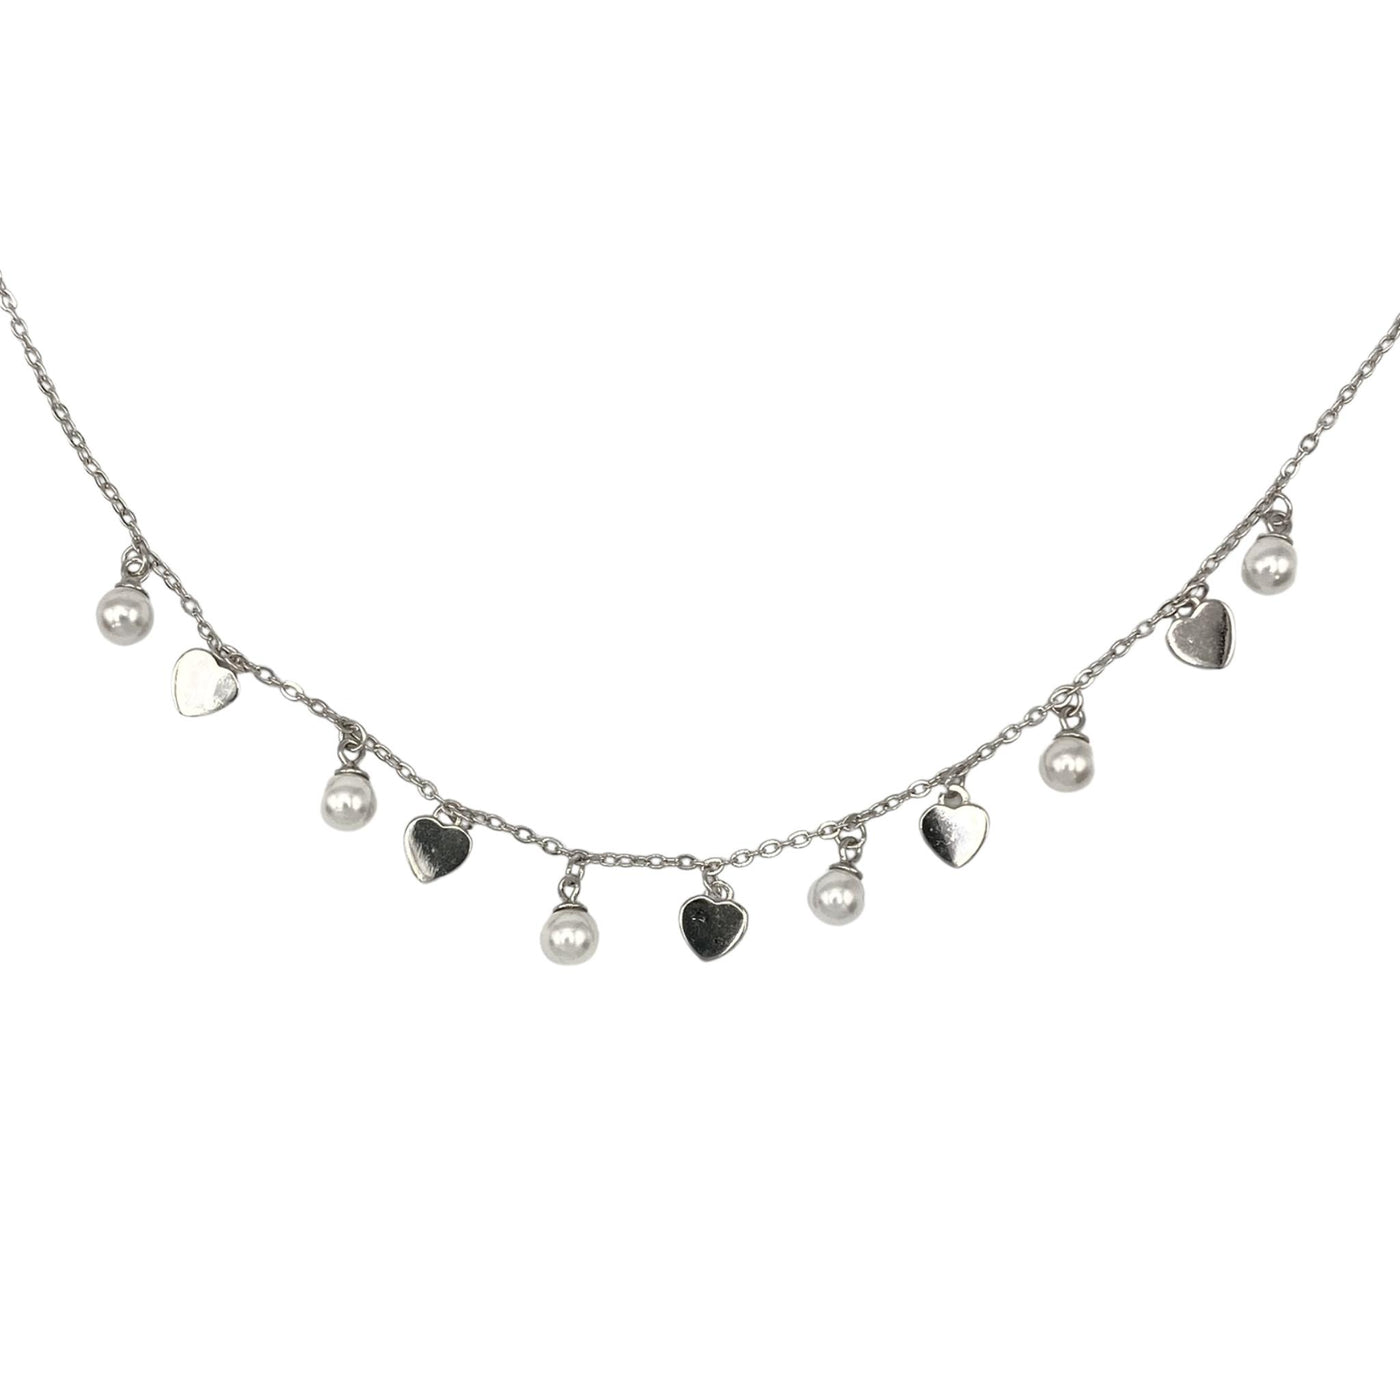 Silver necklace with pearls and hearts